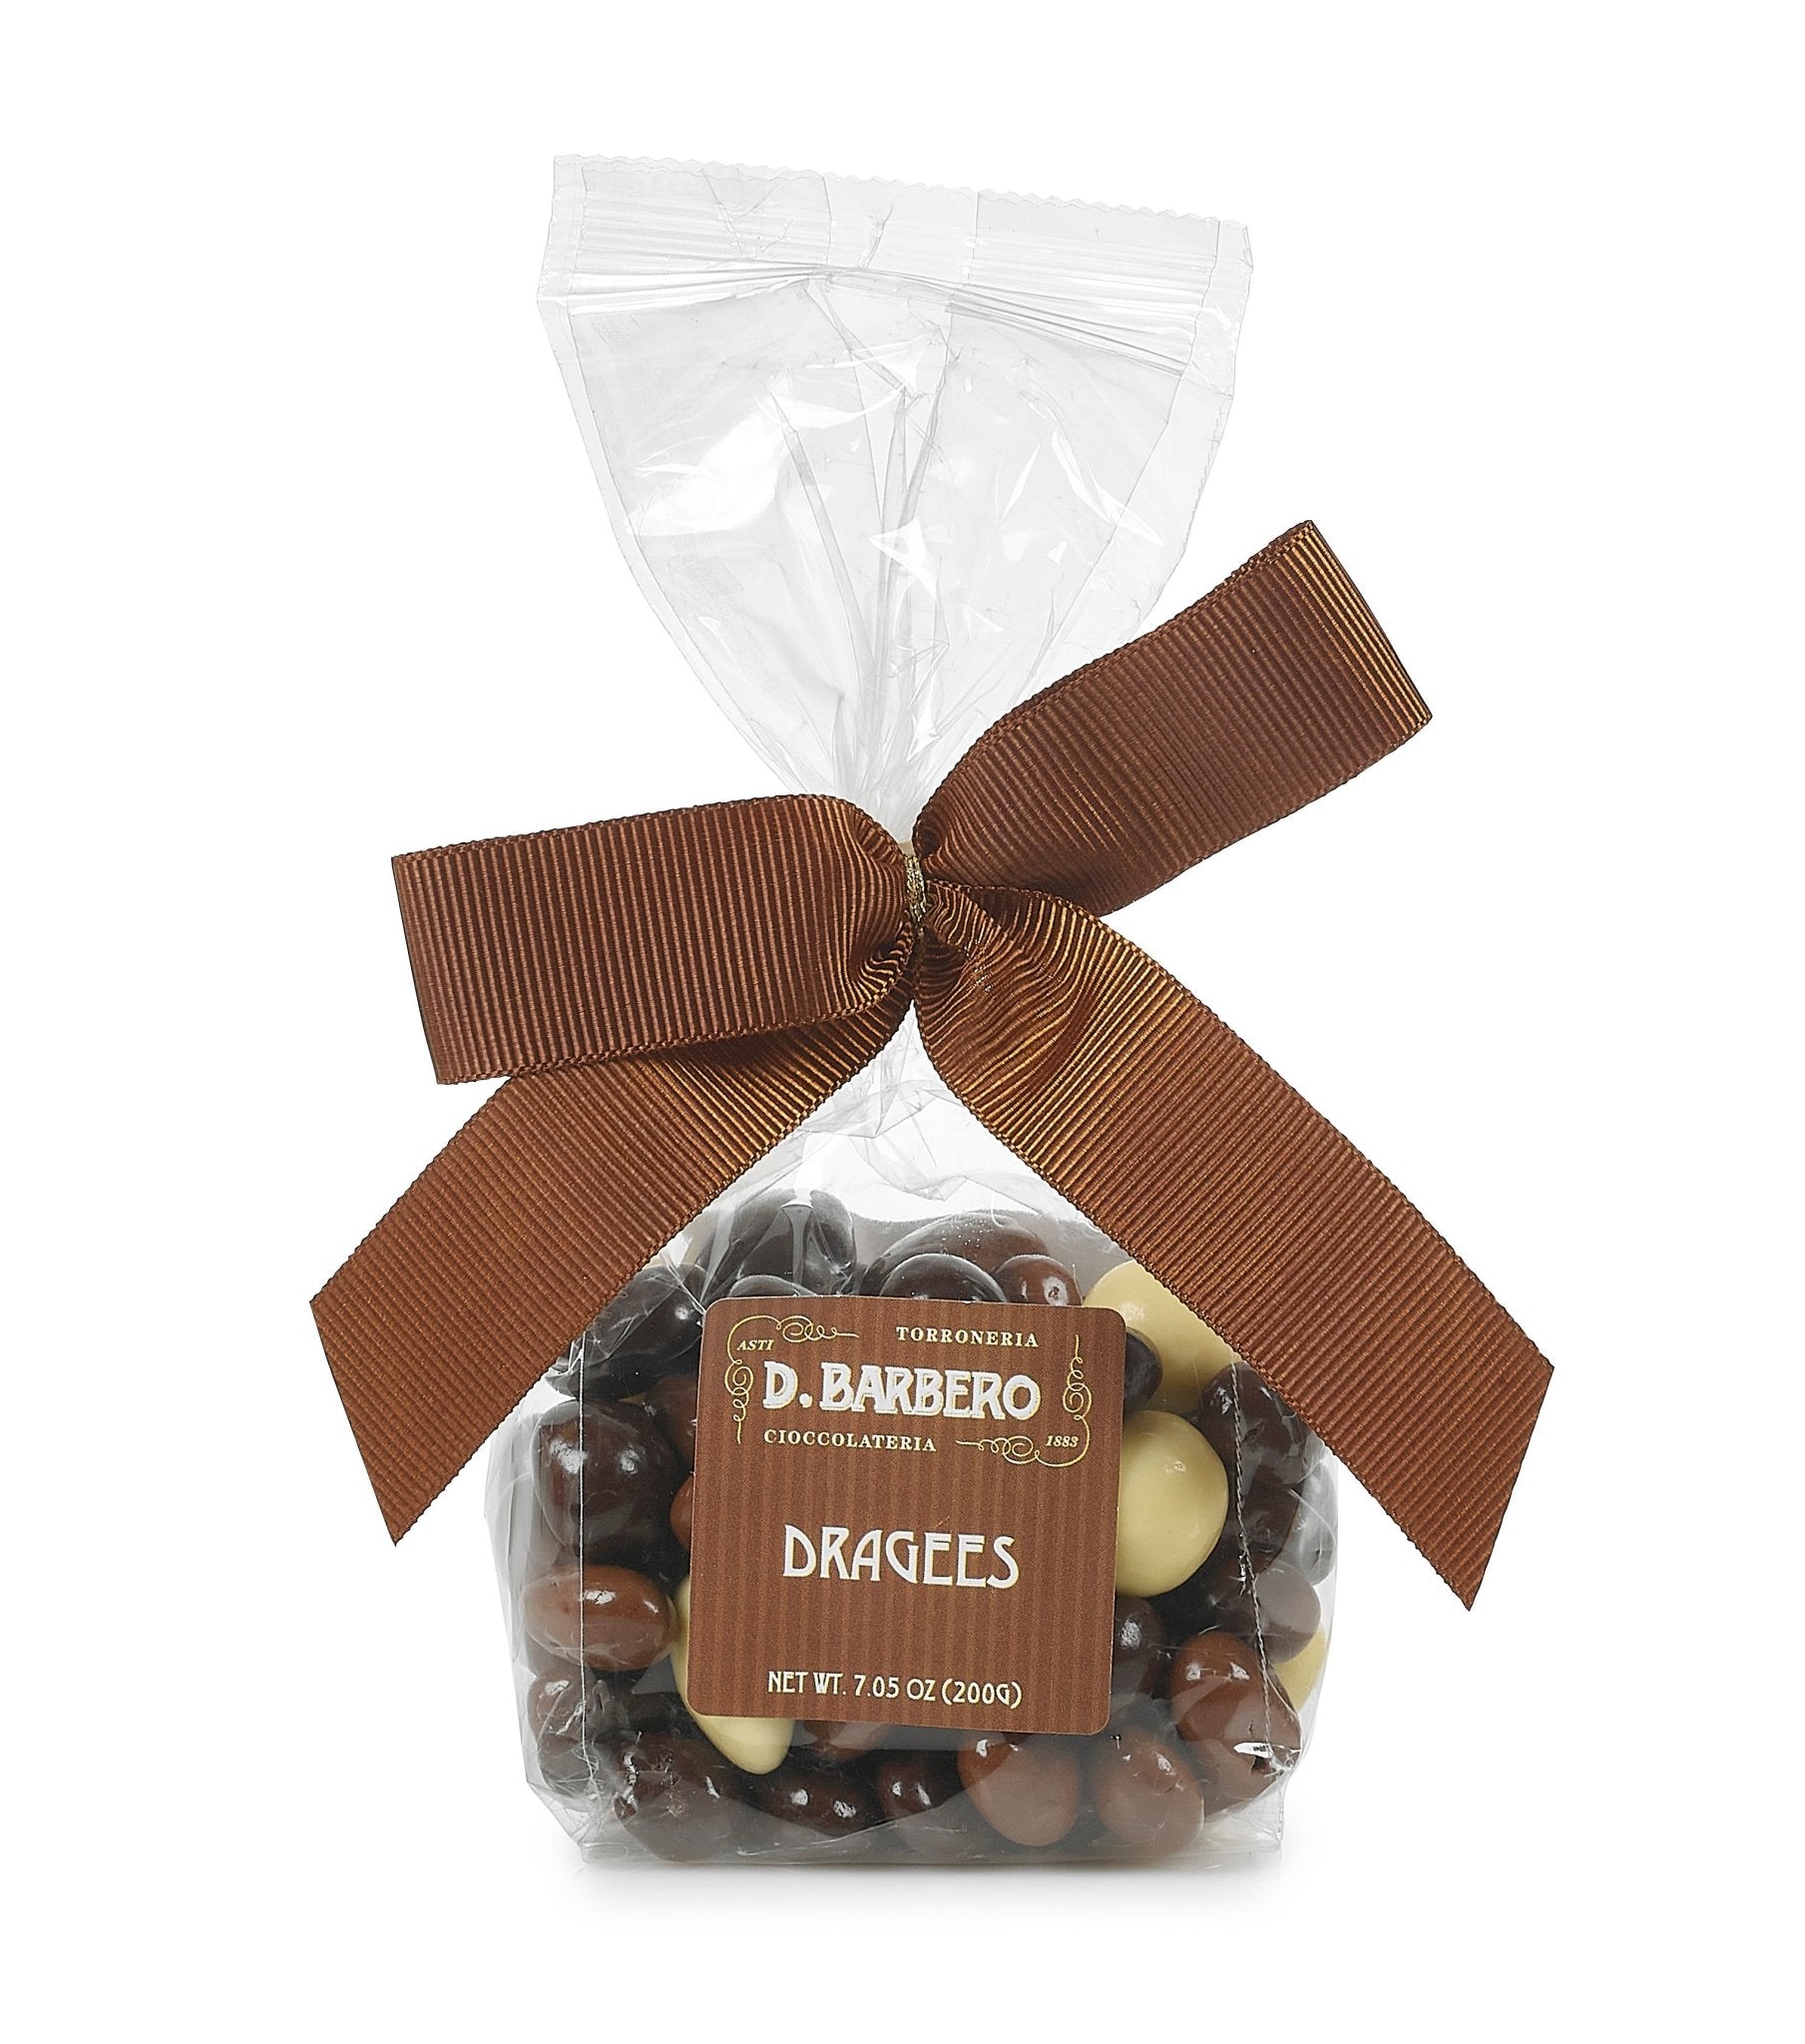 Chocolate Coated Dragees 200g by D. Barbero